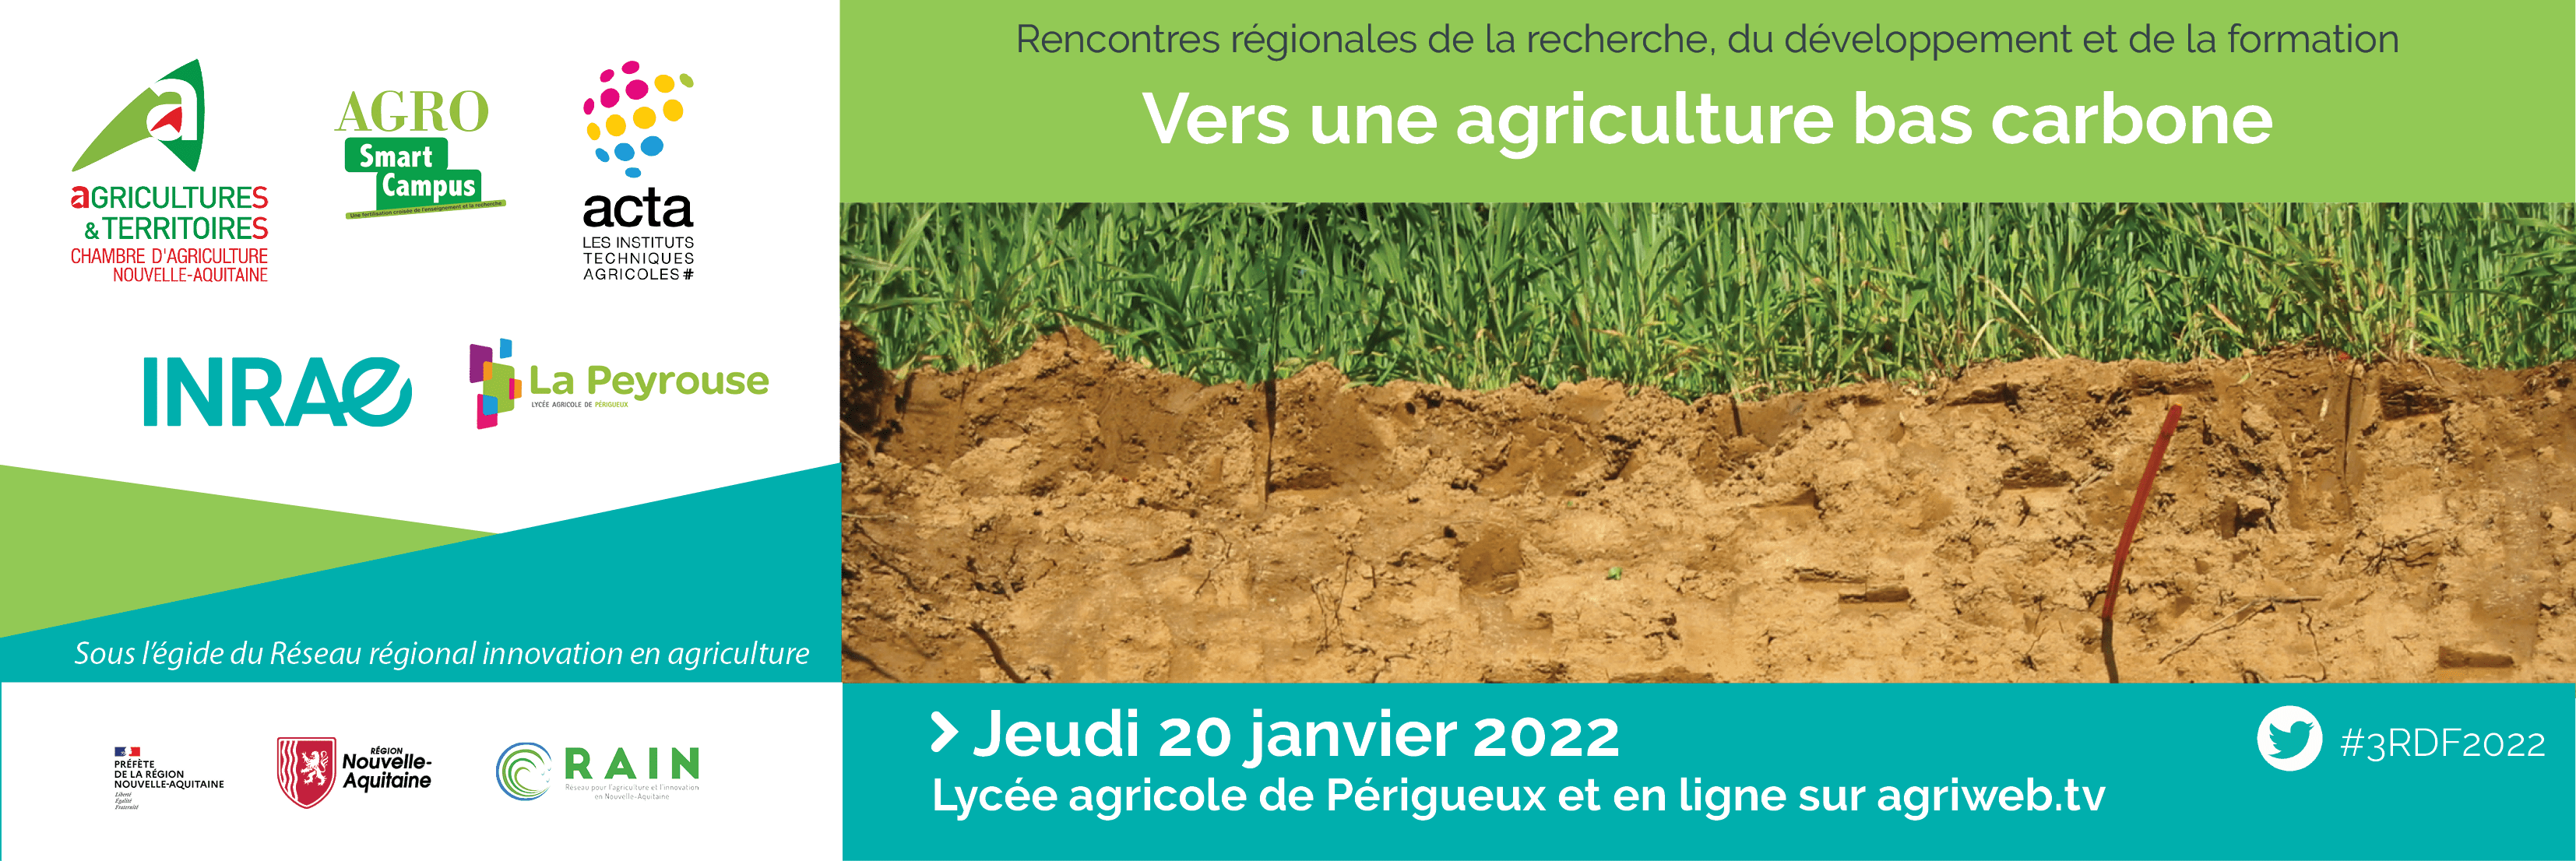 ………………………………Vers une agriculture bas carbone